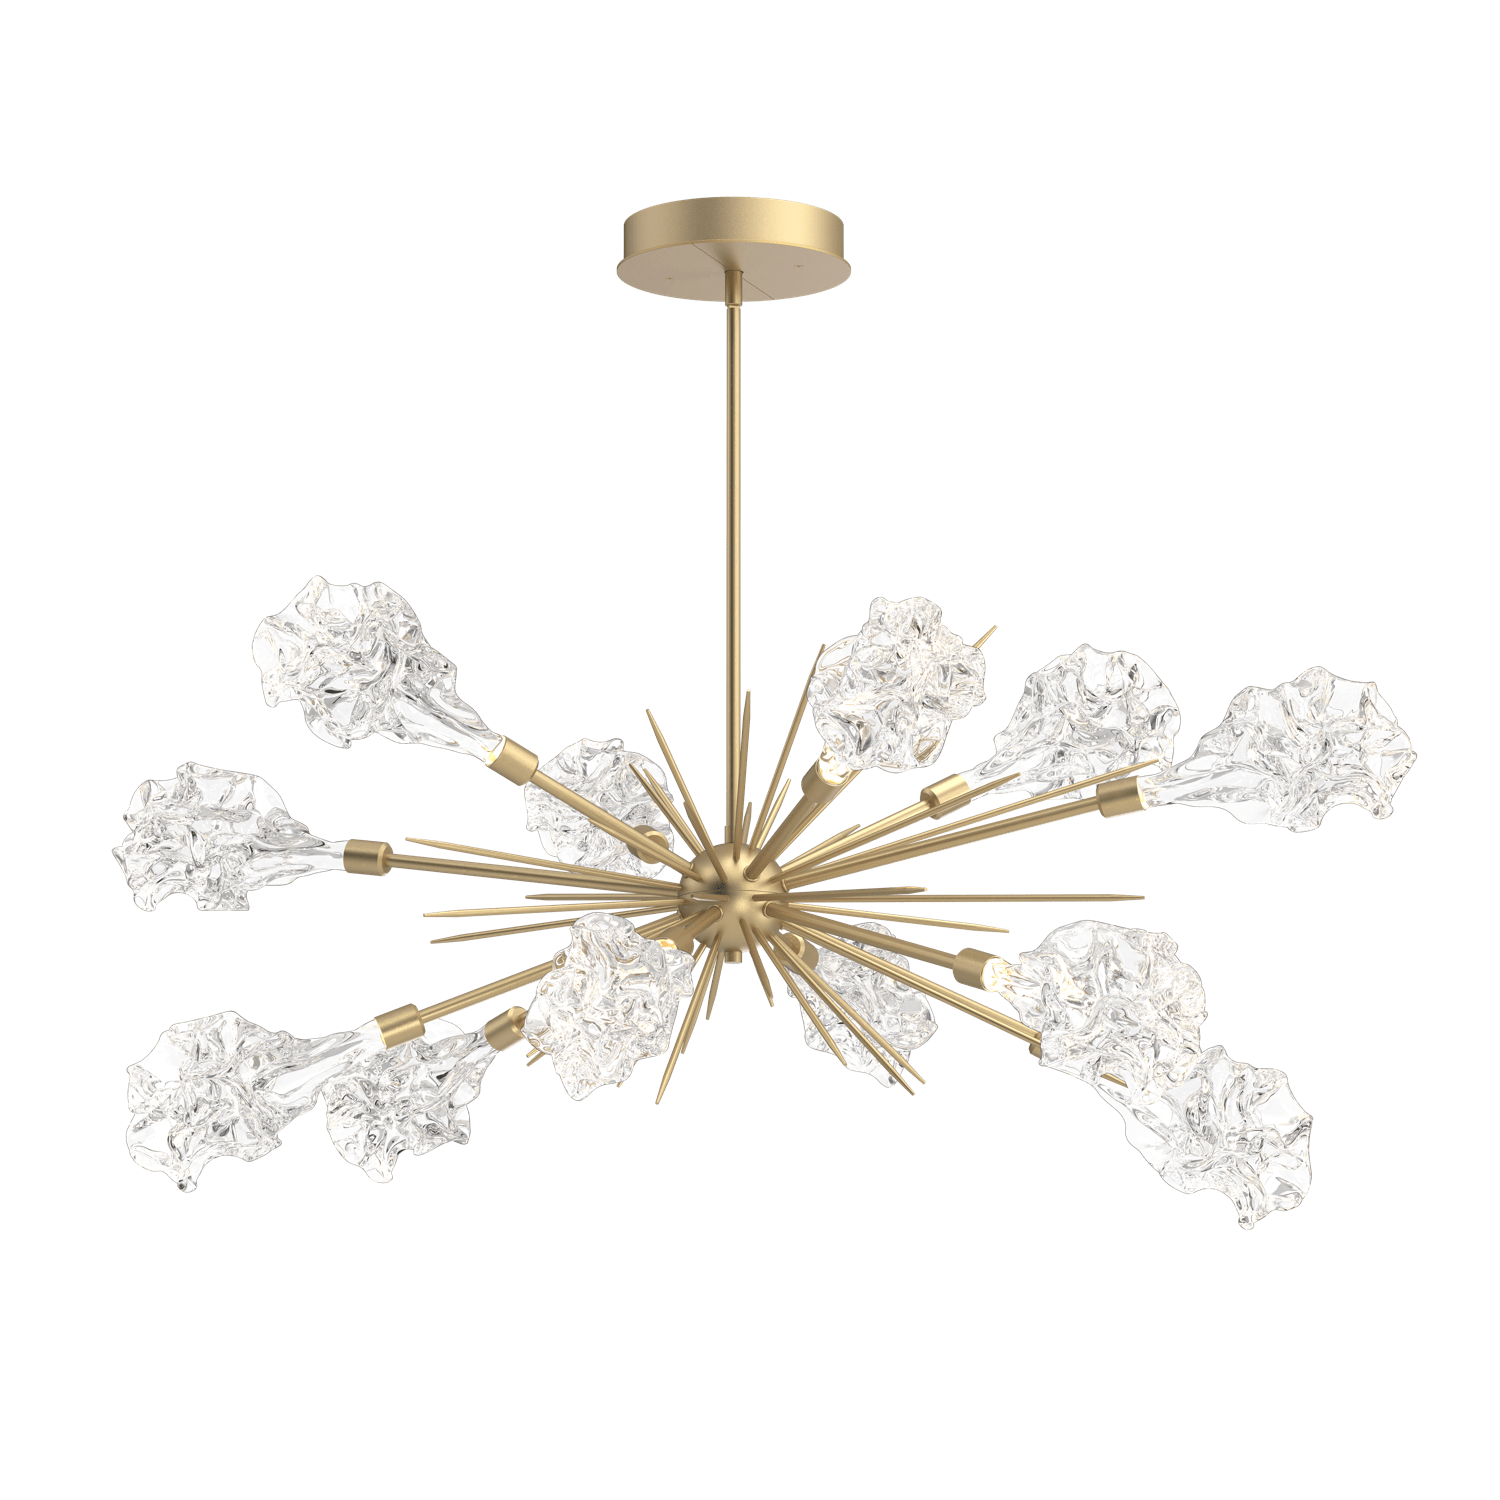 PLB0059-0A-GB-Hammerton-Studio-Blossom-47-inch-oval-starburst-chandelier-with-gilded-brass-finish-and-clear-handblown-crystal-glass-shades-and-LED-lamping